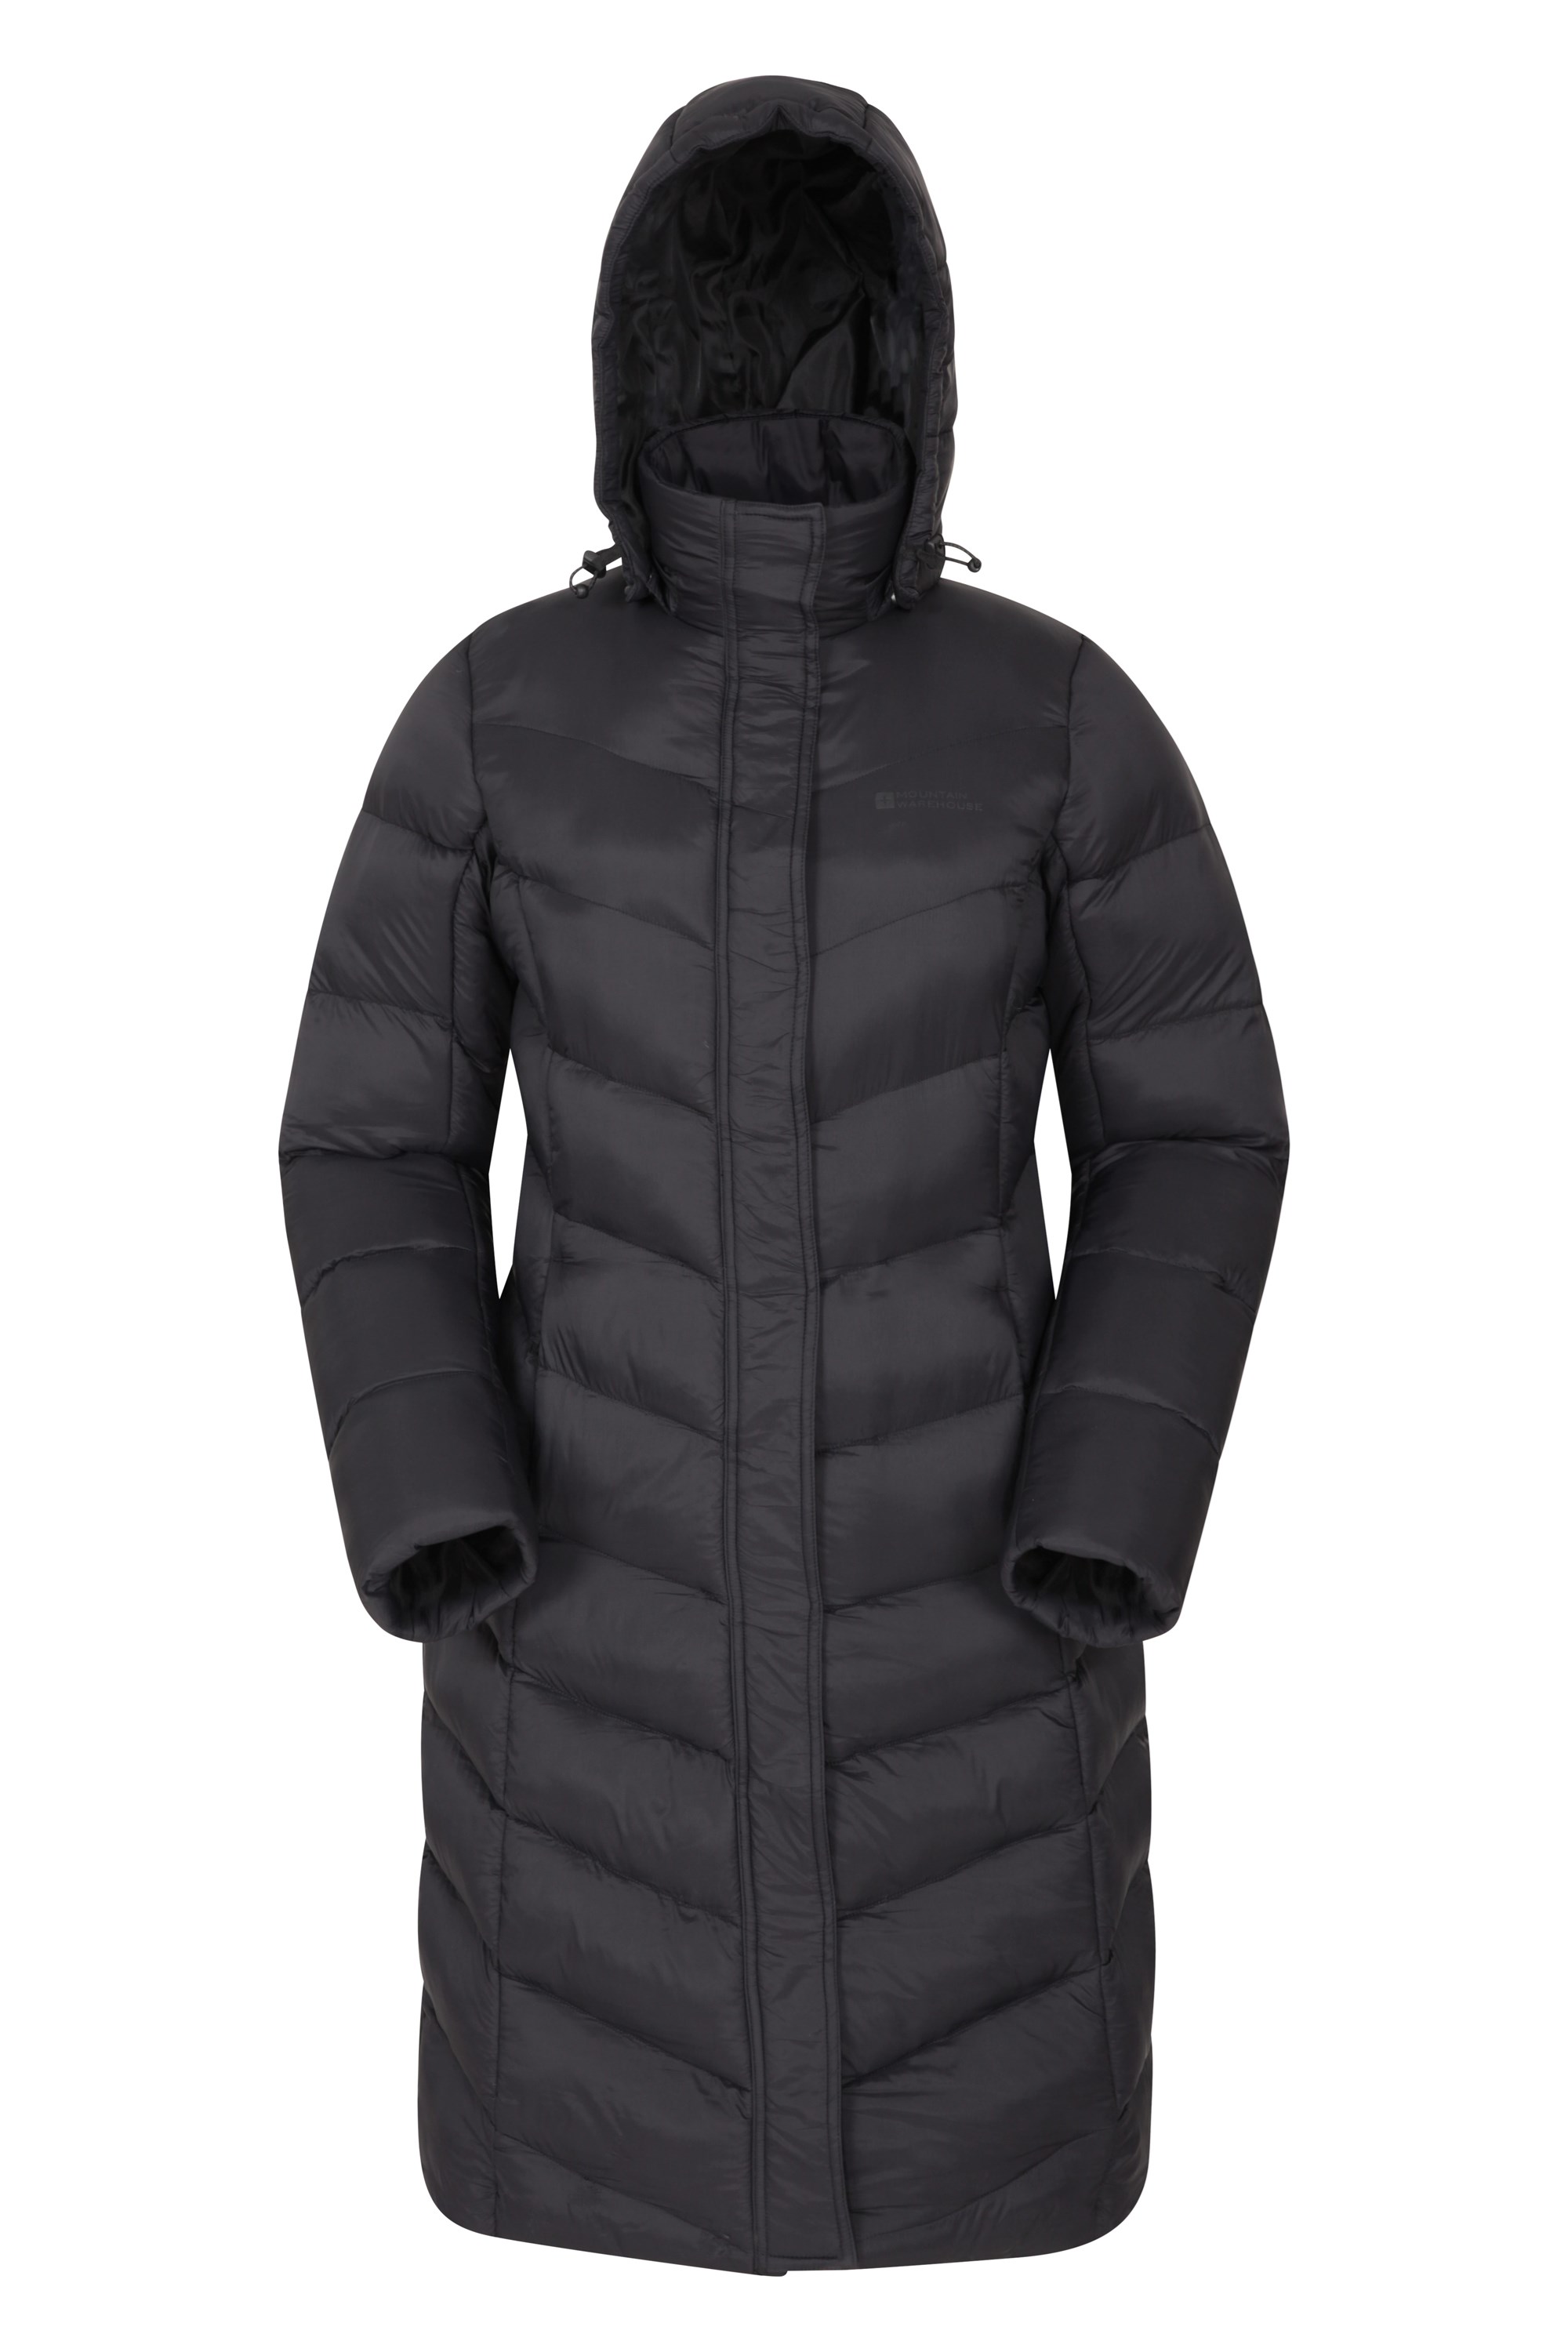 Womens Clothing Jackets Padded and down jackets Save 20% Mountain Warehouse Synthetic Water Resistant Ladies 